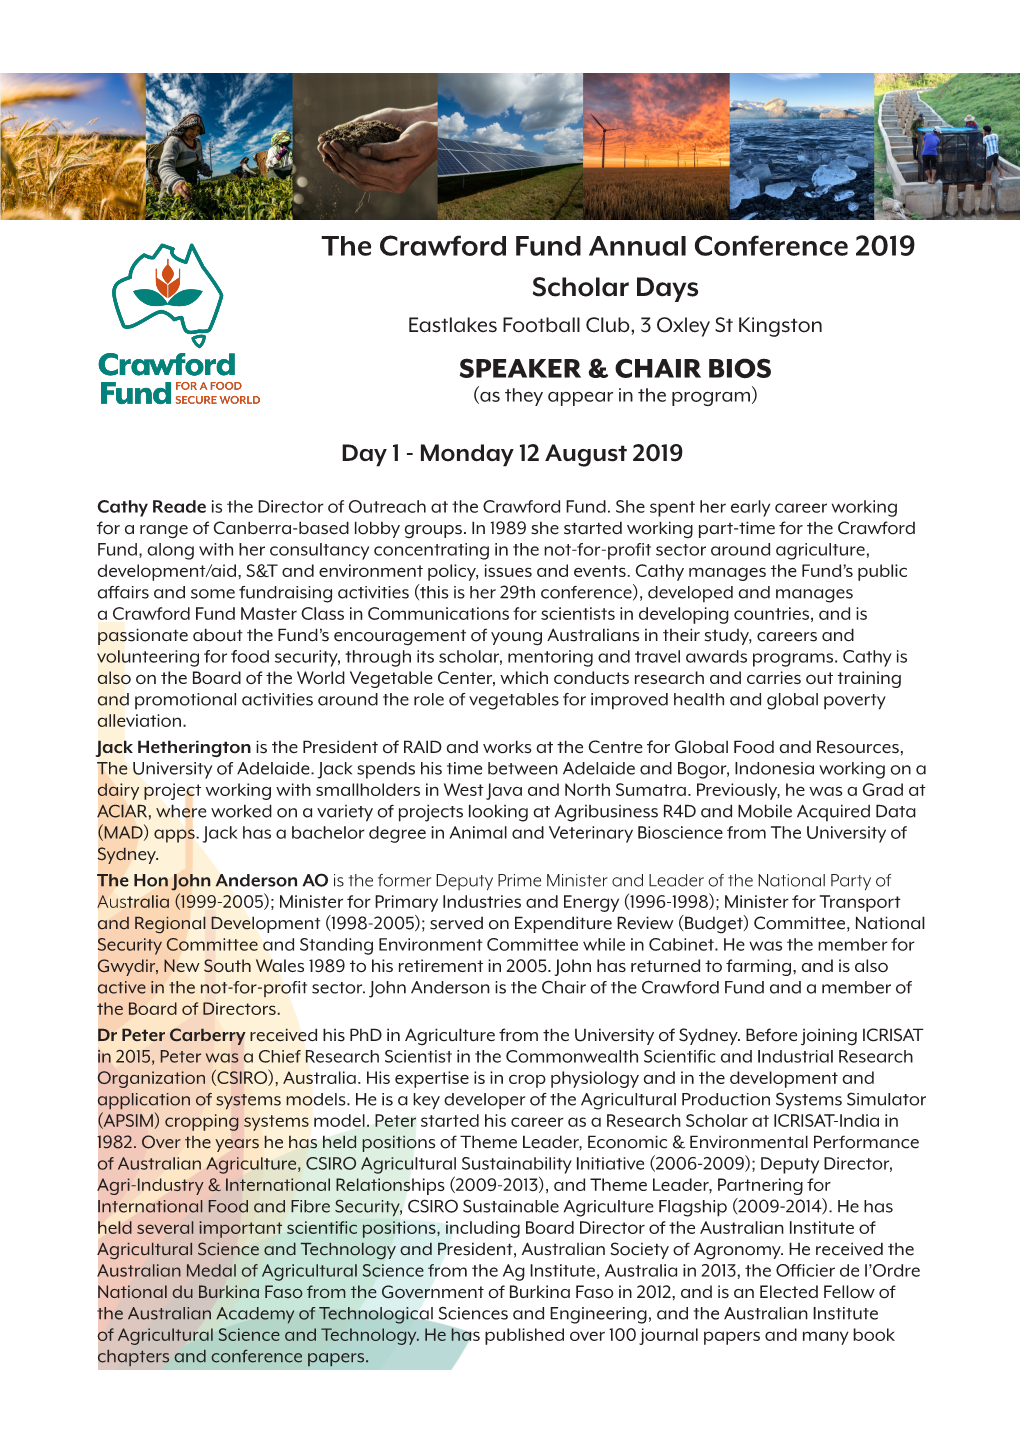 The Crawford Fund Annual Conference 2019 Scholar Days Eastlakes Football Club, 3 Oxley St Kingston SPEAKER & CHAIR BIOS (As They Appear in the Program)